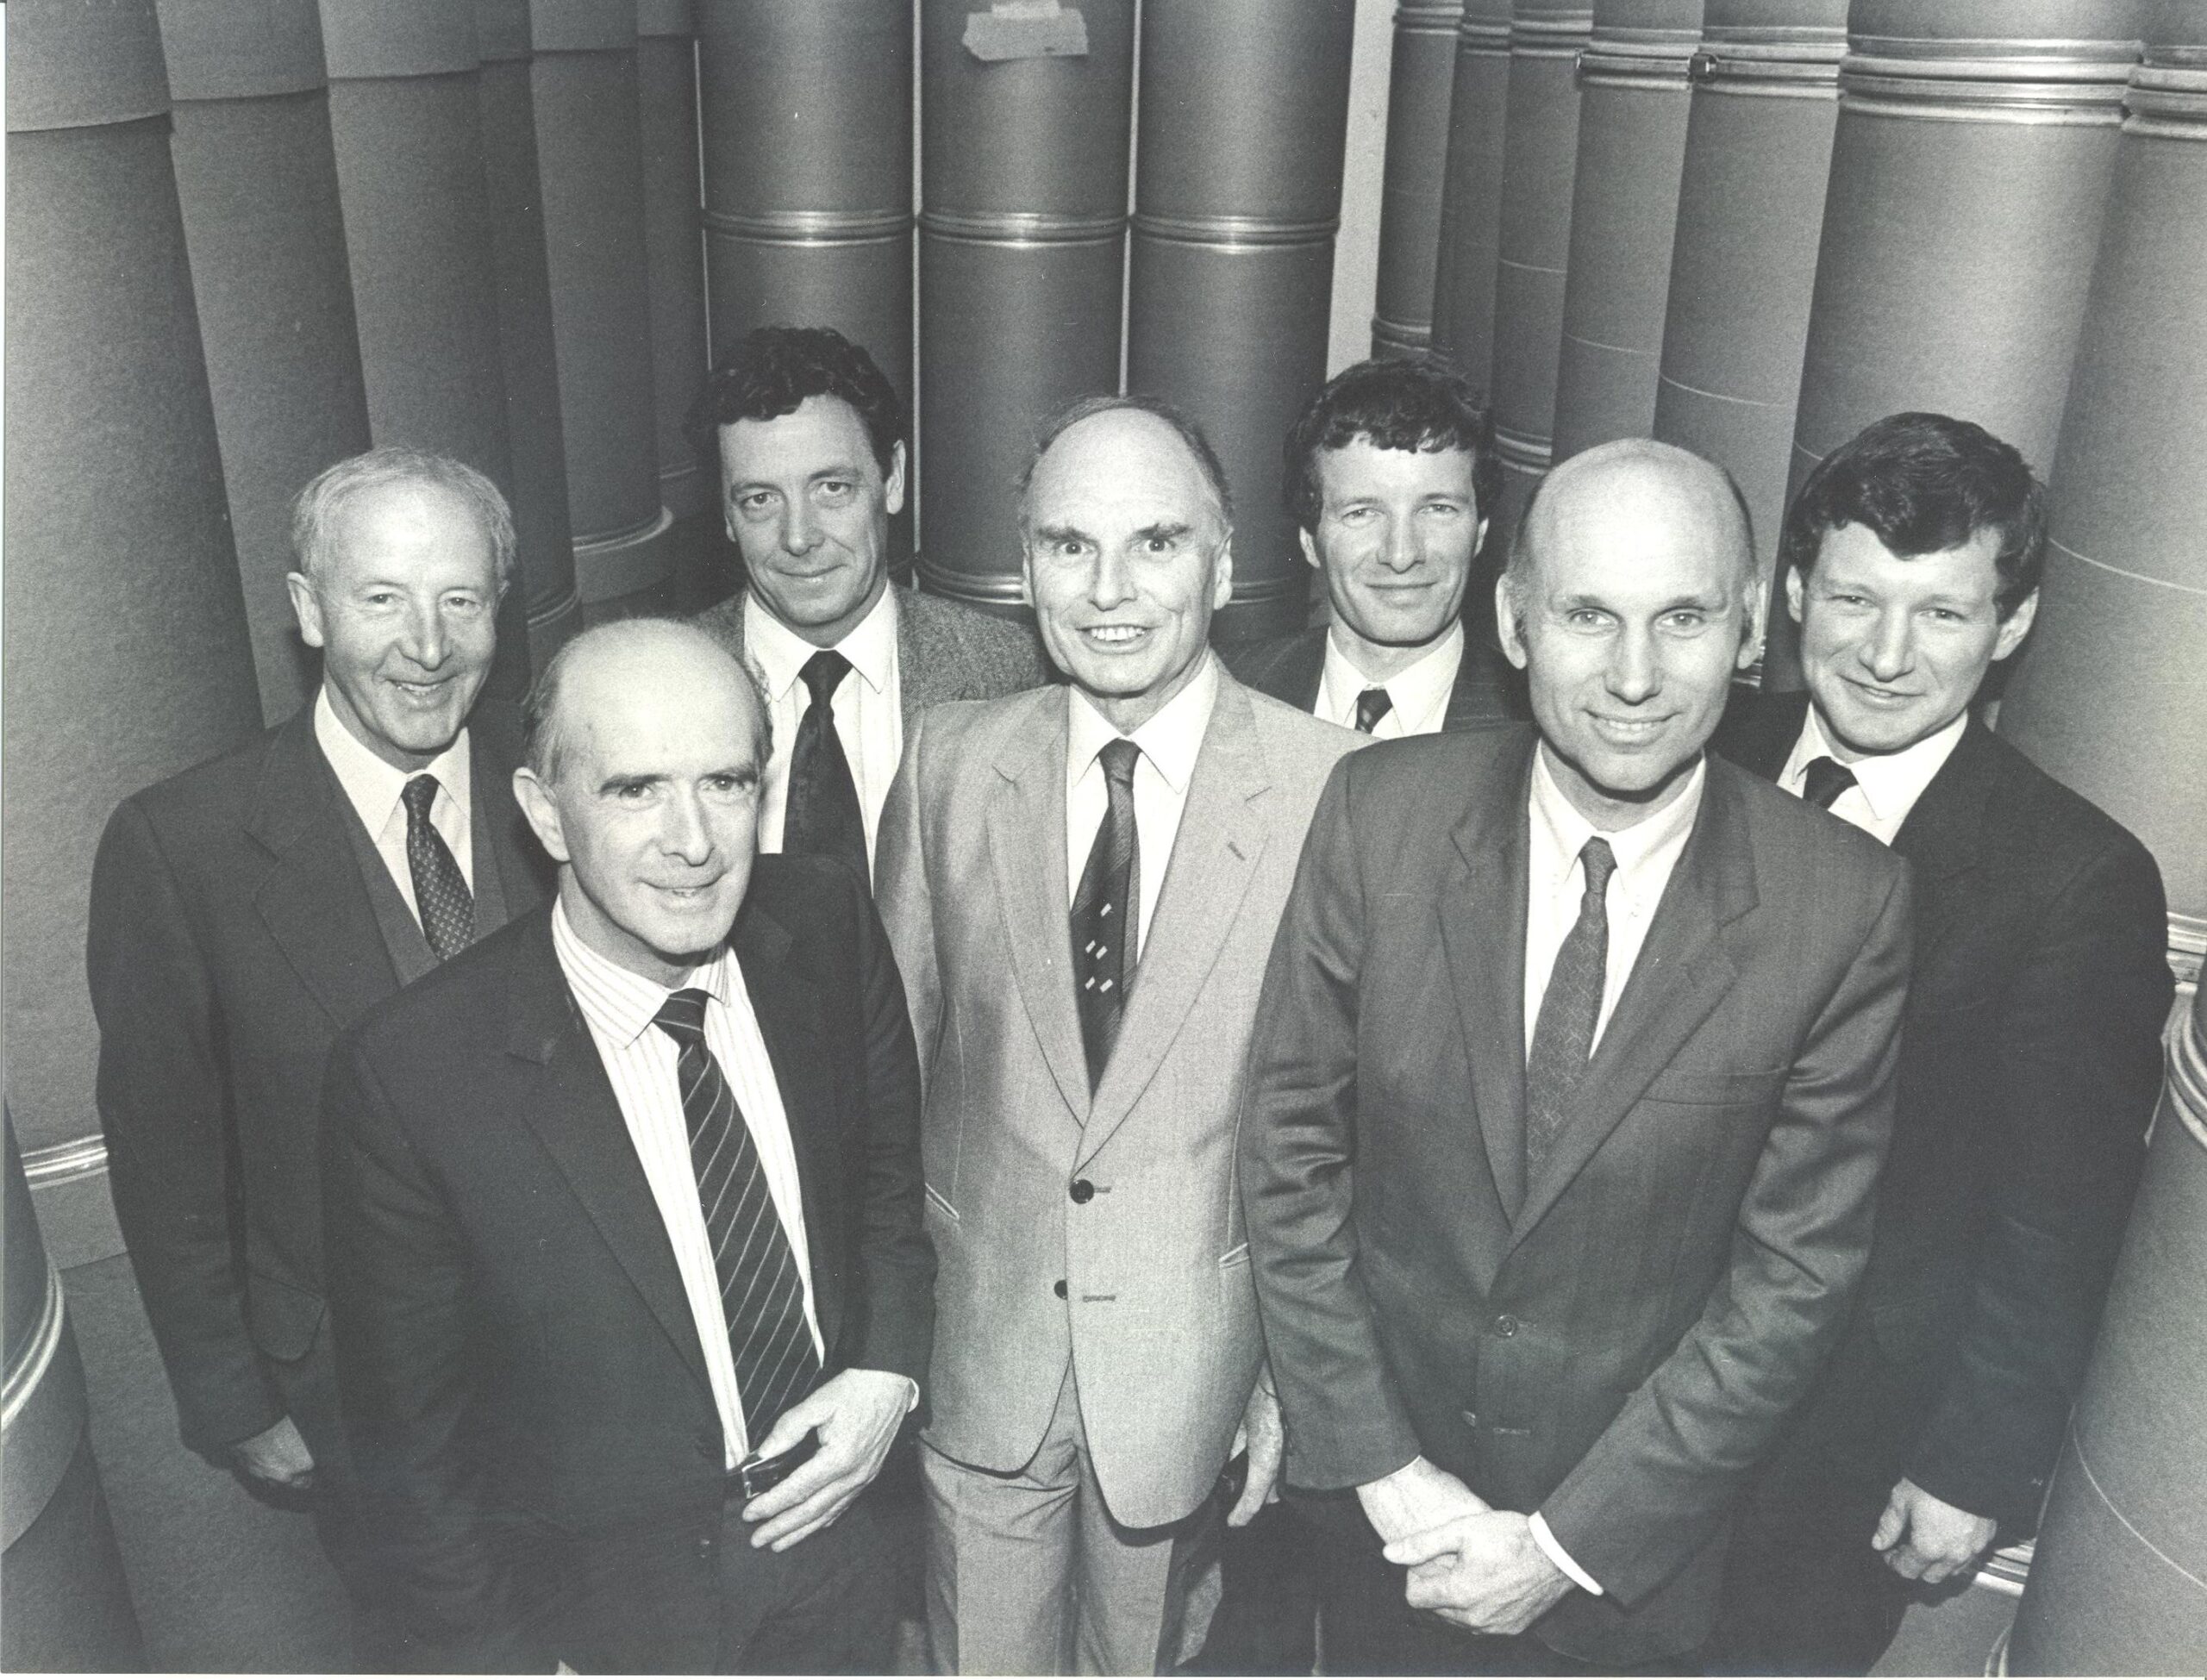 BW photo of Industrial Packaging founders and directors in 1990s